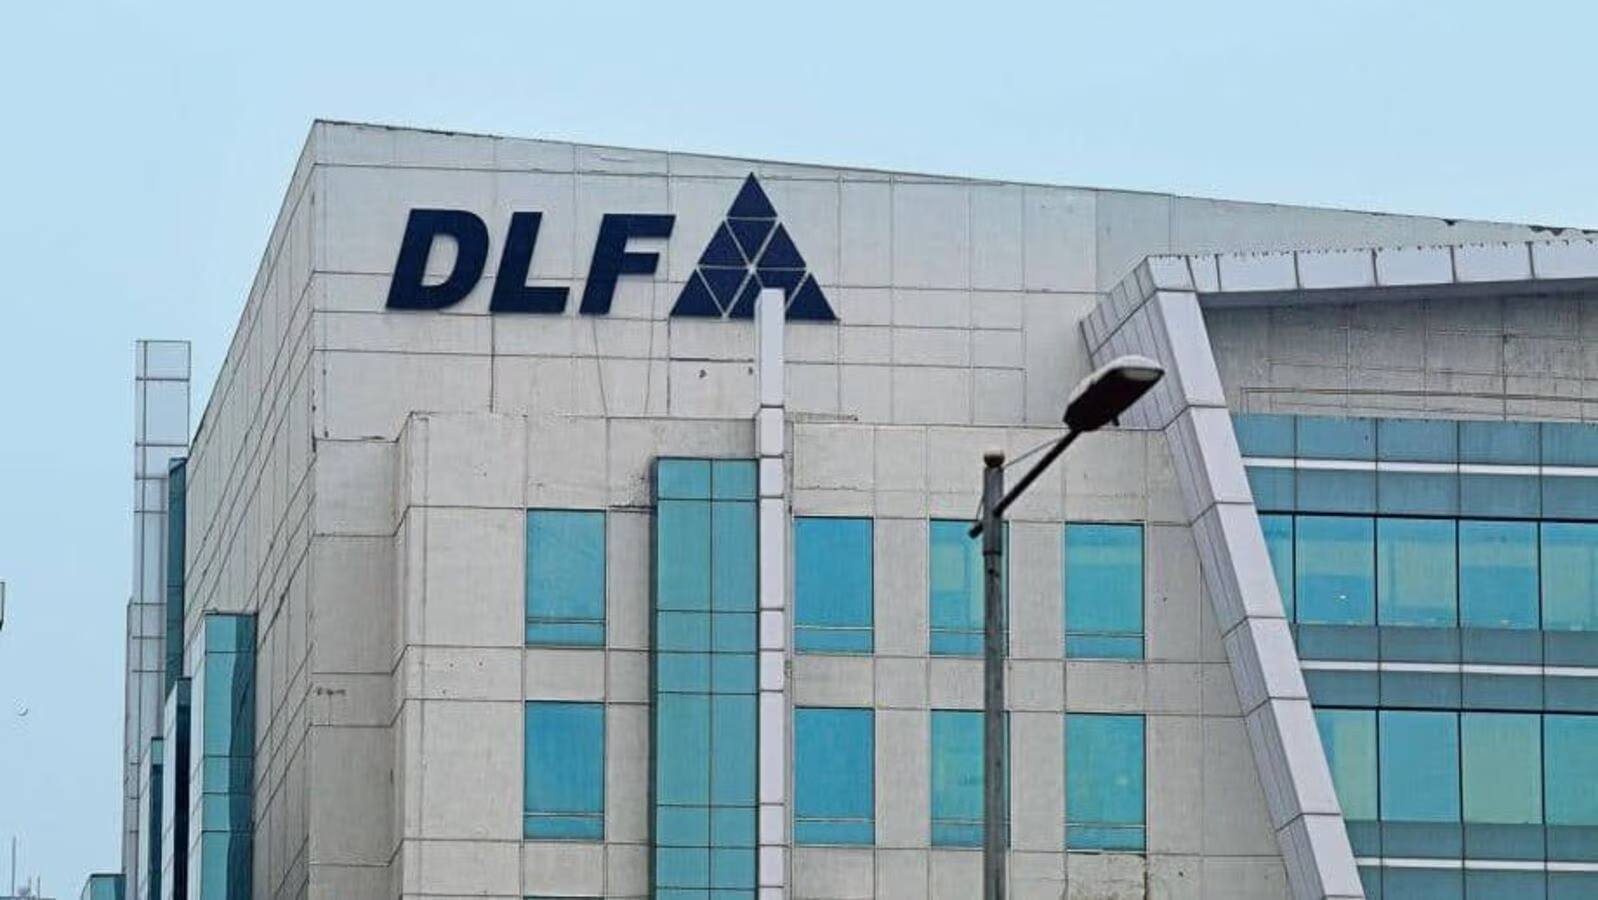 DLF sells 1,113 luxury flats for ₹7,200 crore within 3 days in its new Gurugram project